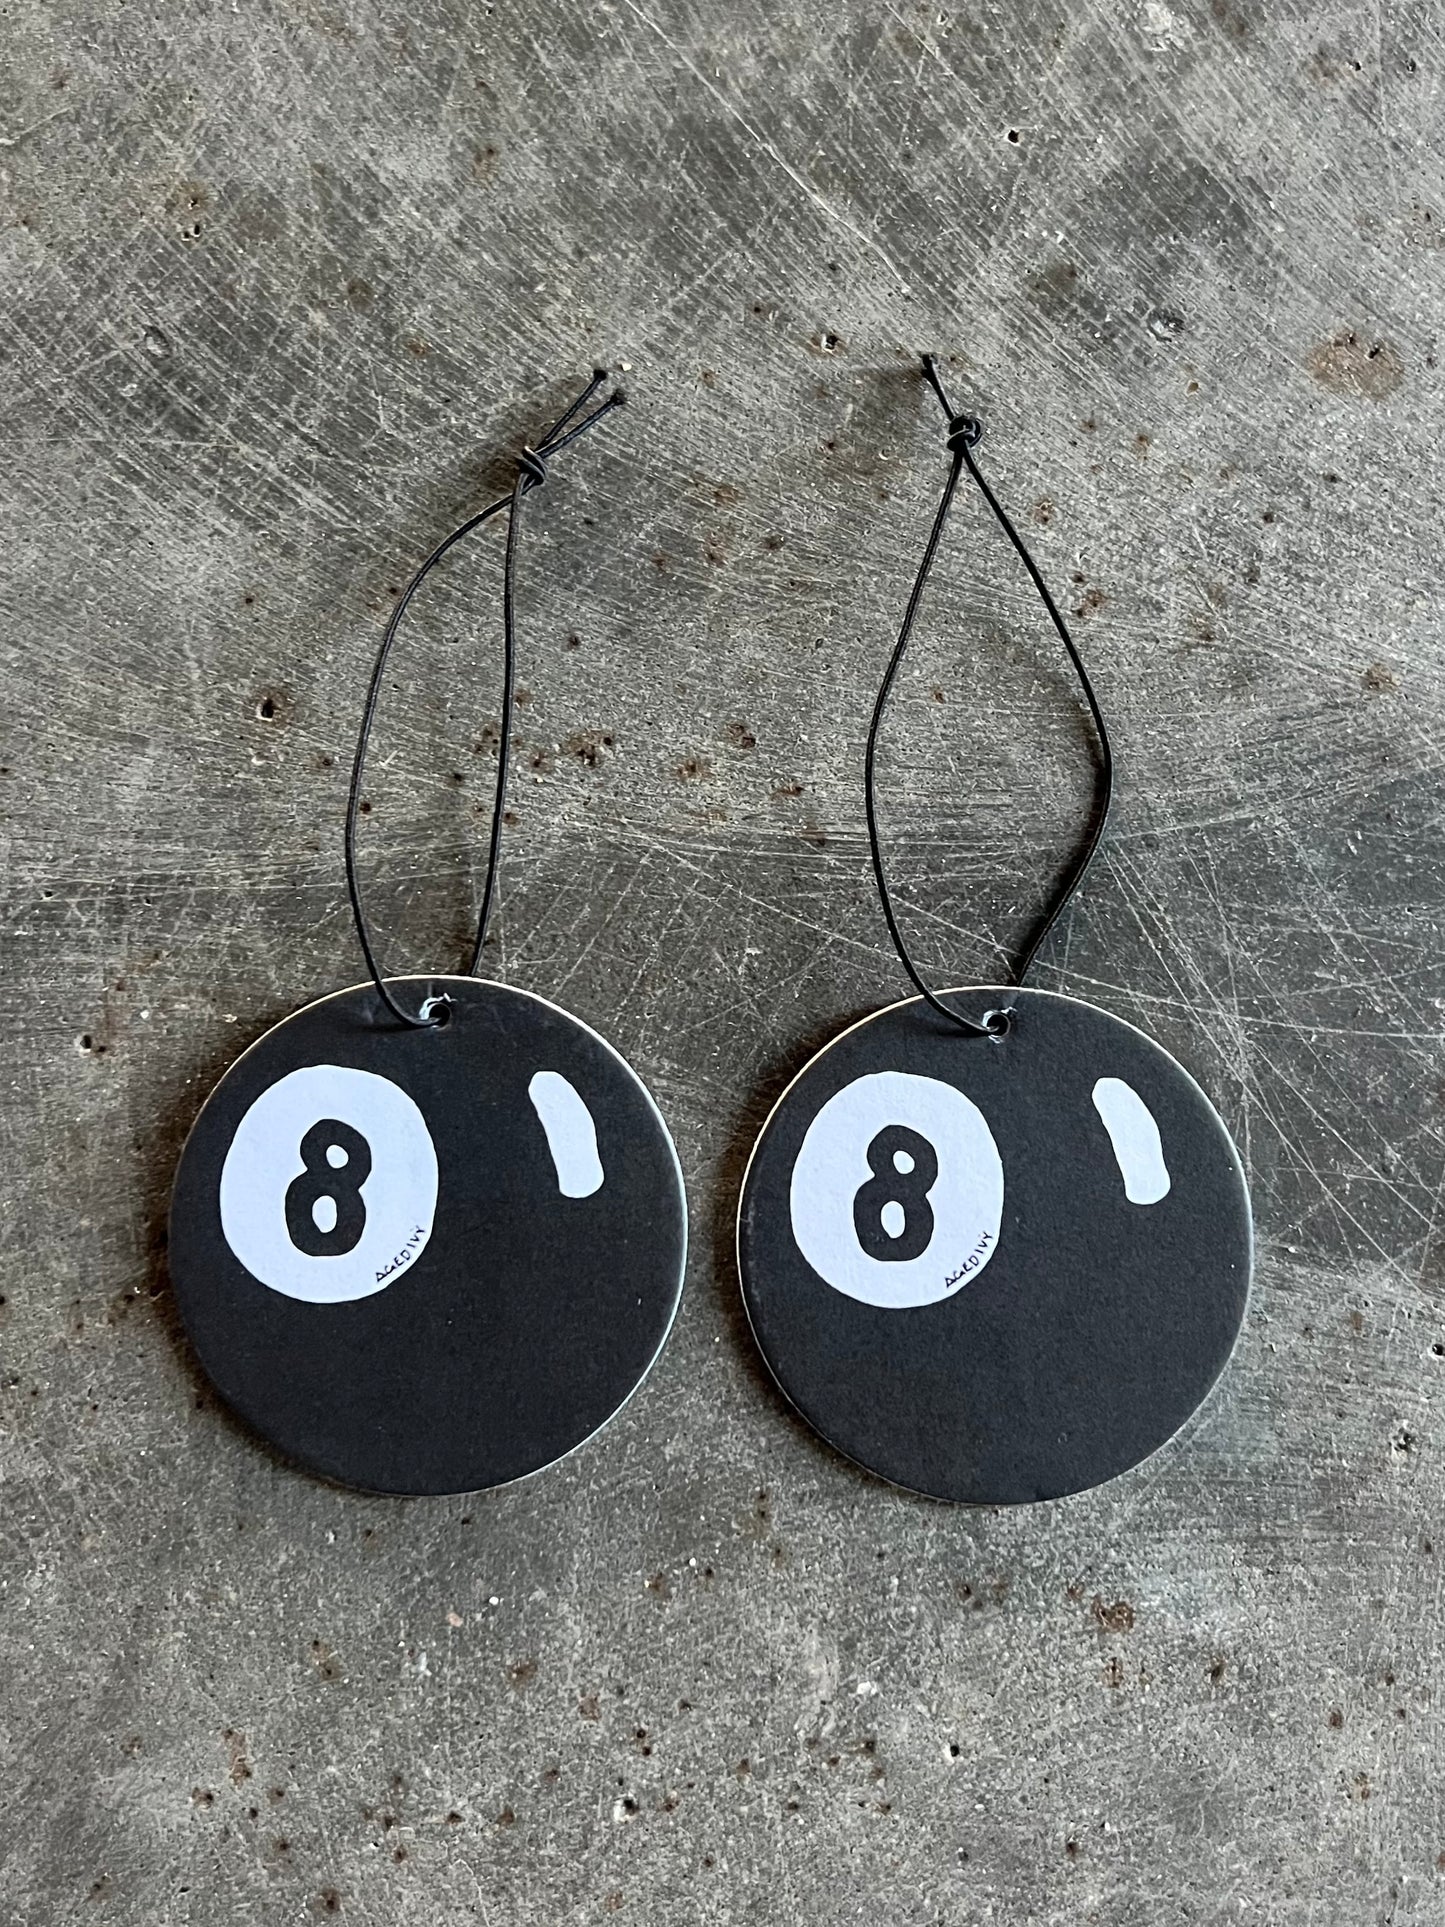 Aged Ivy 8Ball Air Fresheners (2 Pack)